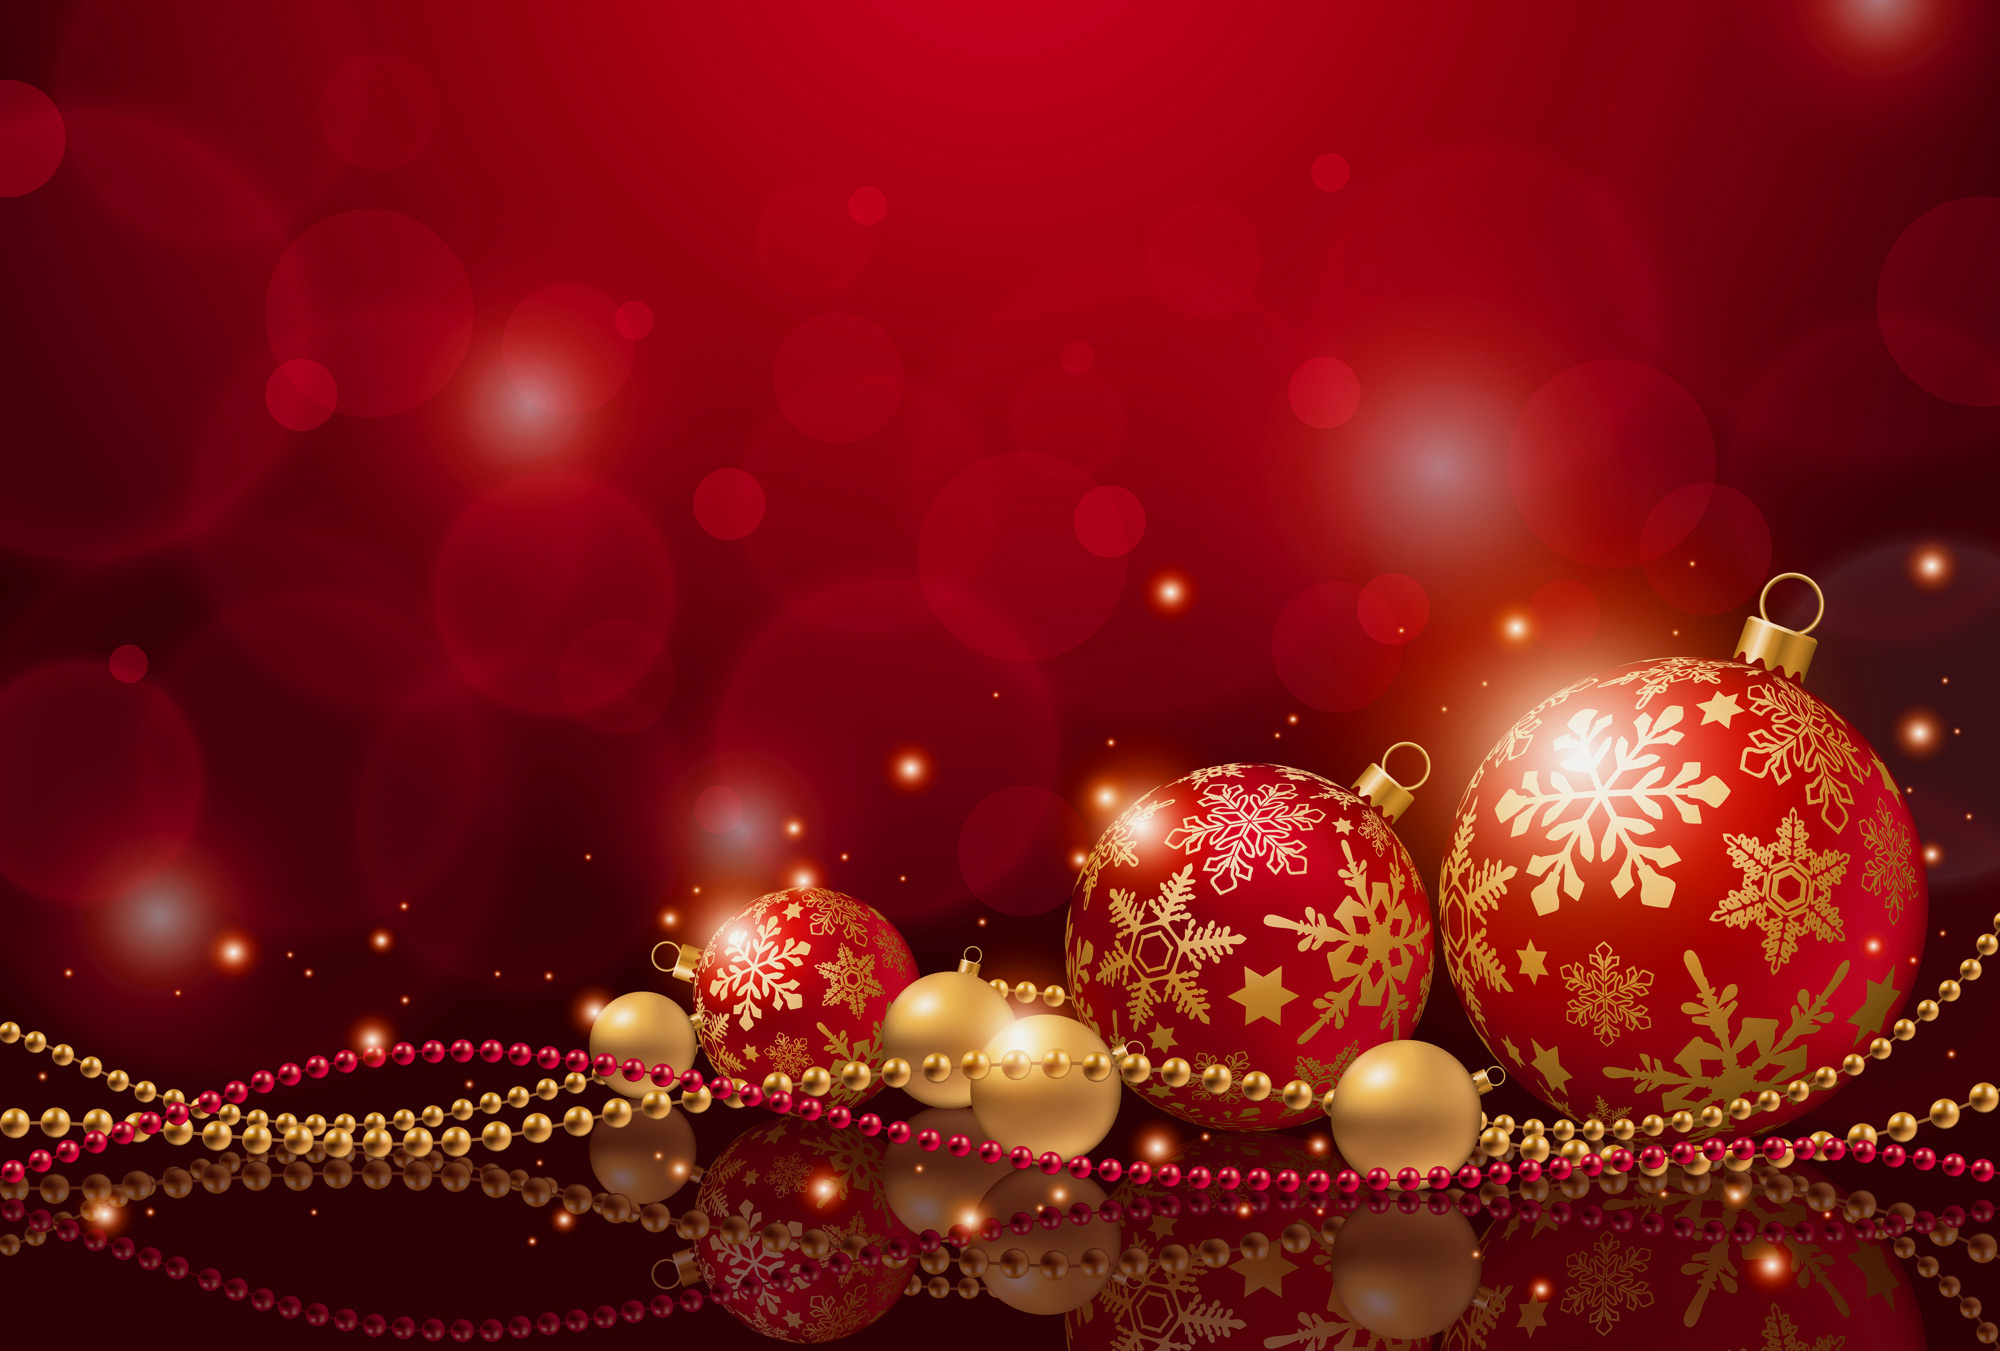 Red_Christmas_Background_with_Christmas_Balls.jpg?m=1399676400